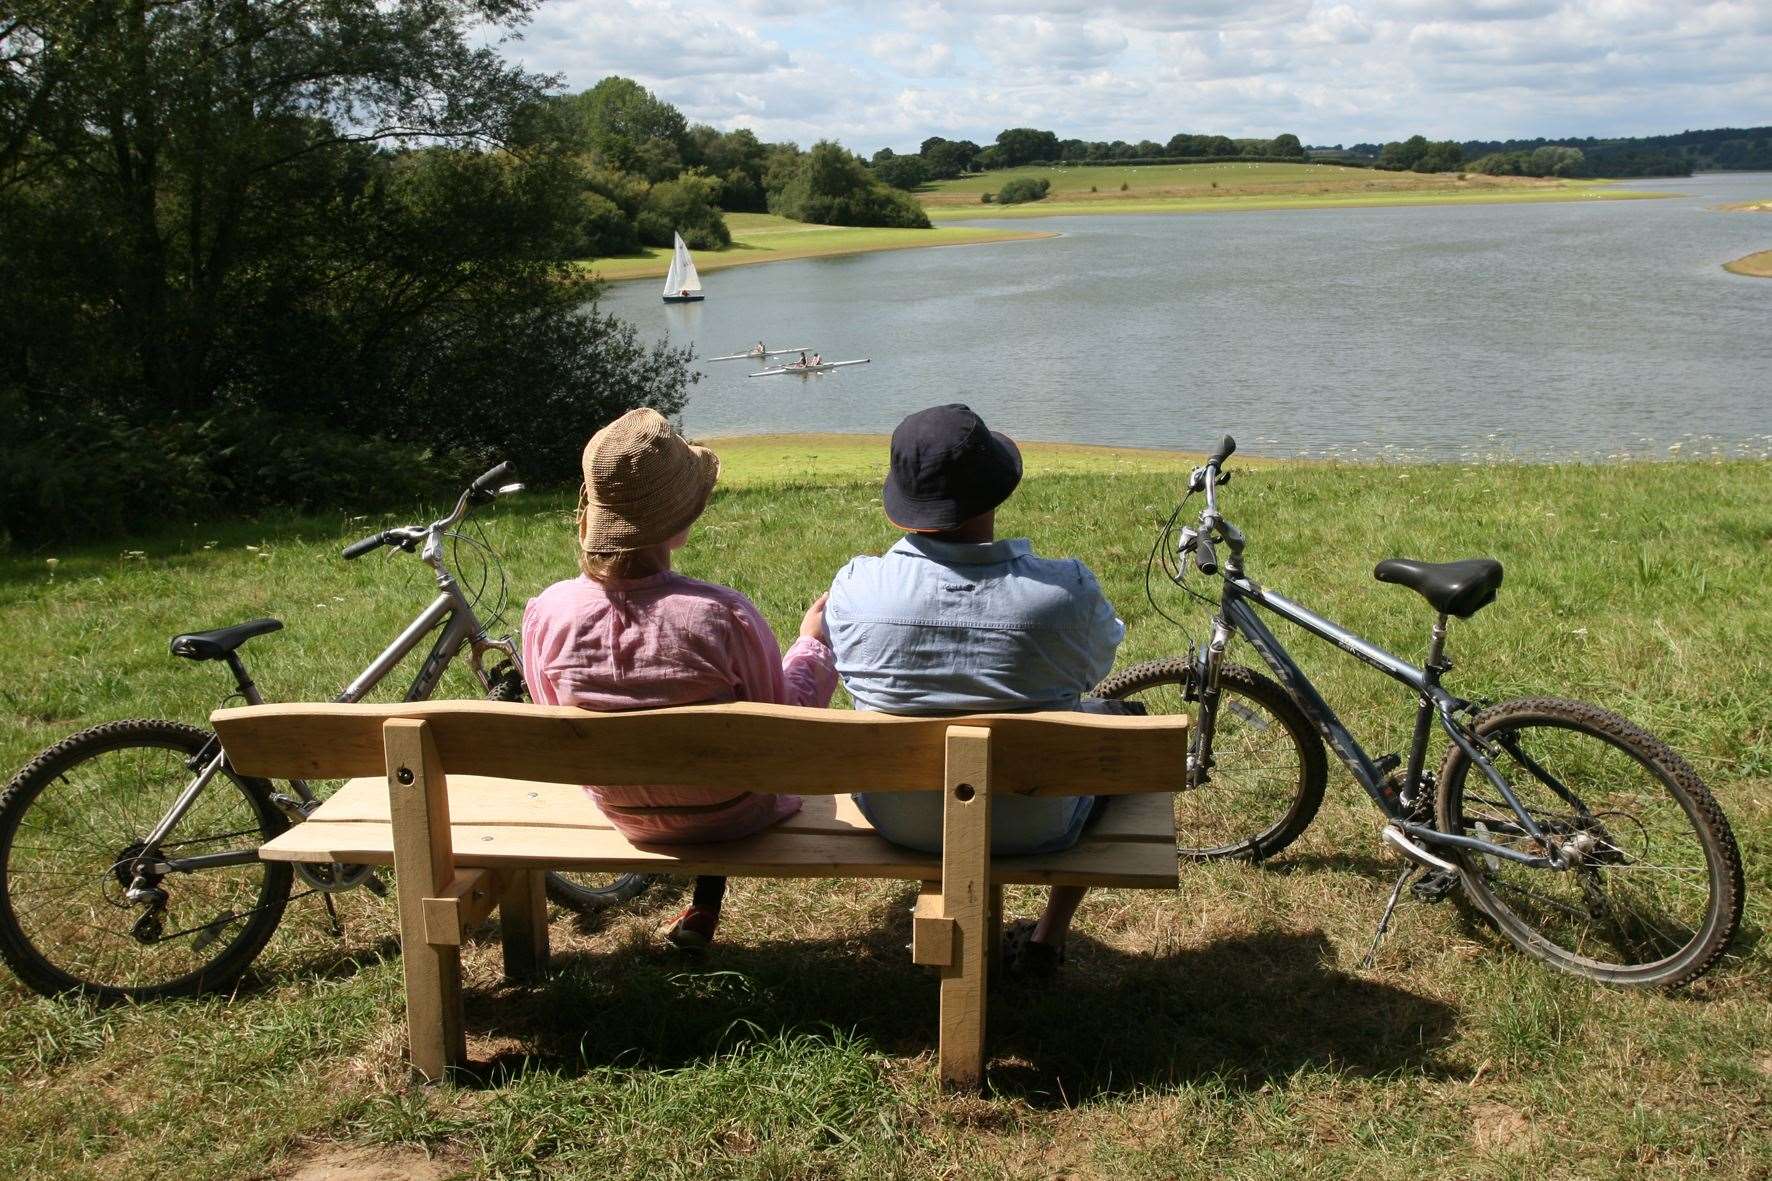 Bewl Water have announced that they will be opening for walking, cycling, fishing and members water sports.